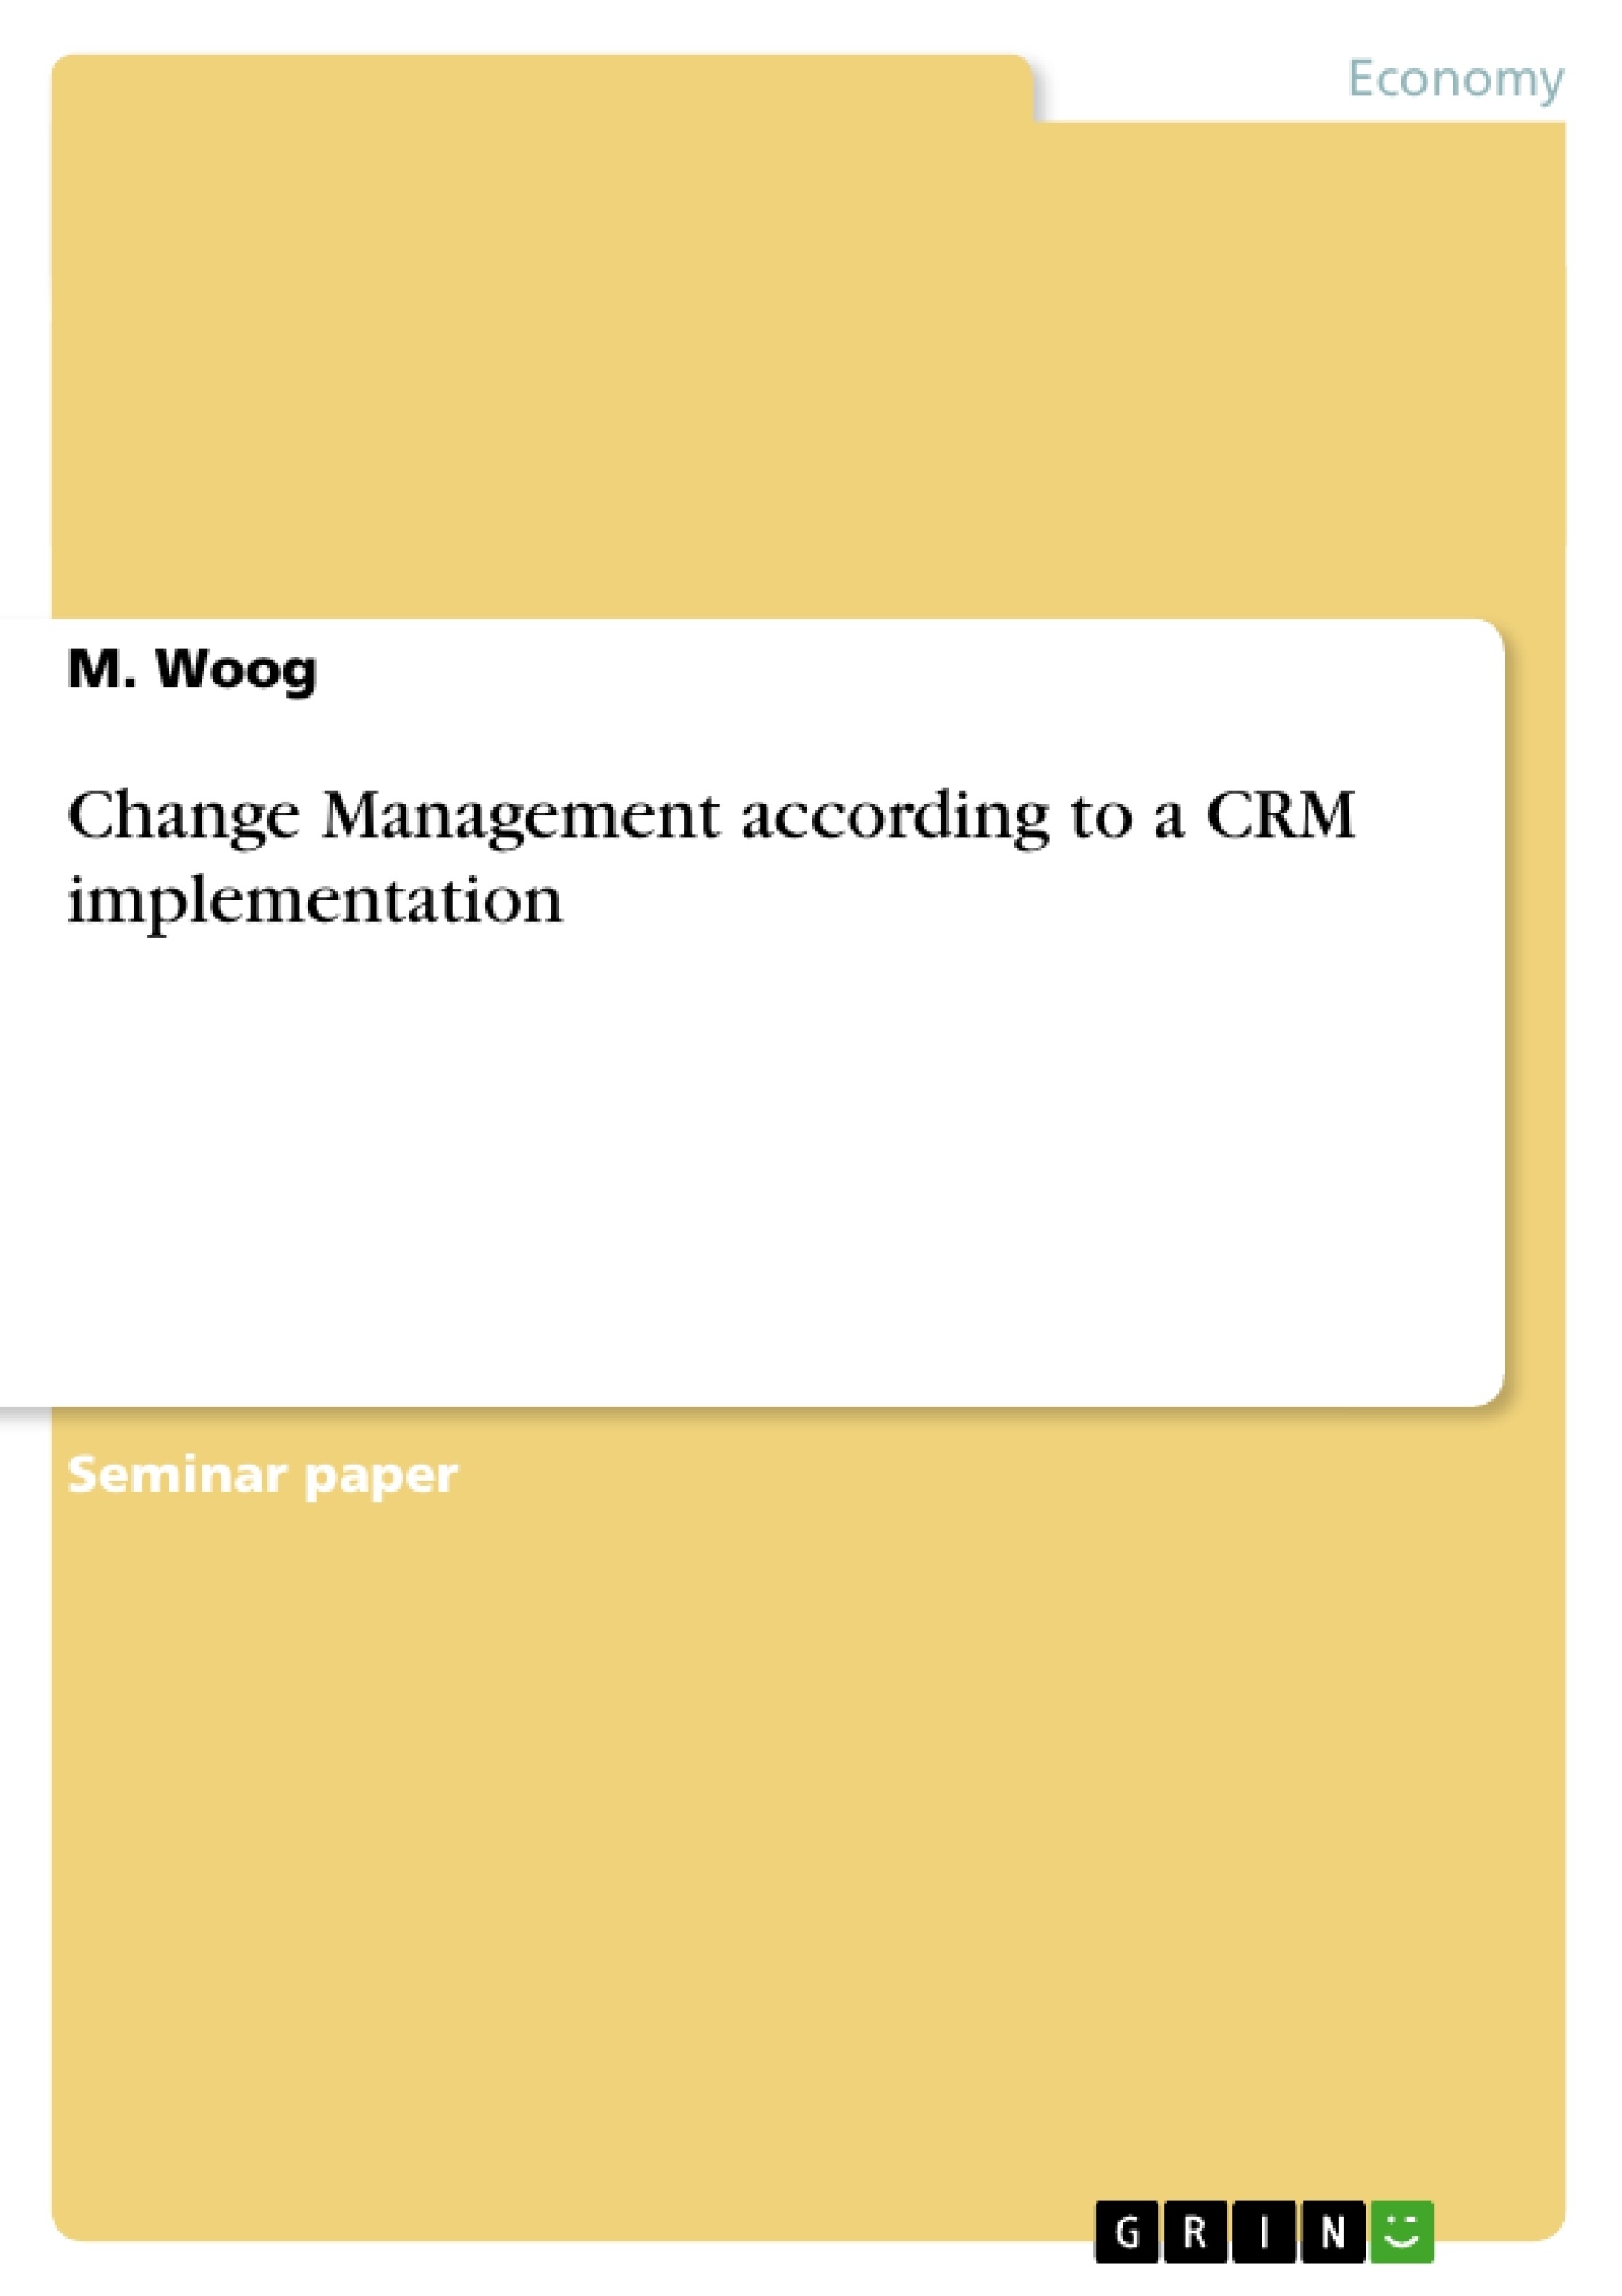 Title: Change Management according to a CRM implementation 